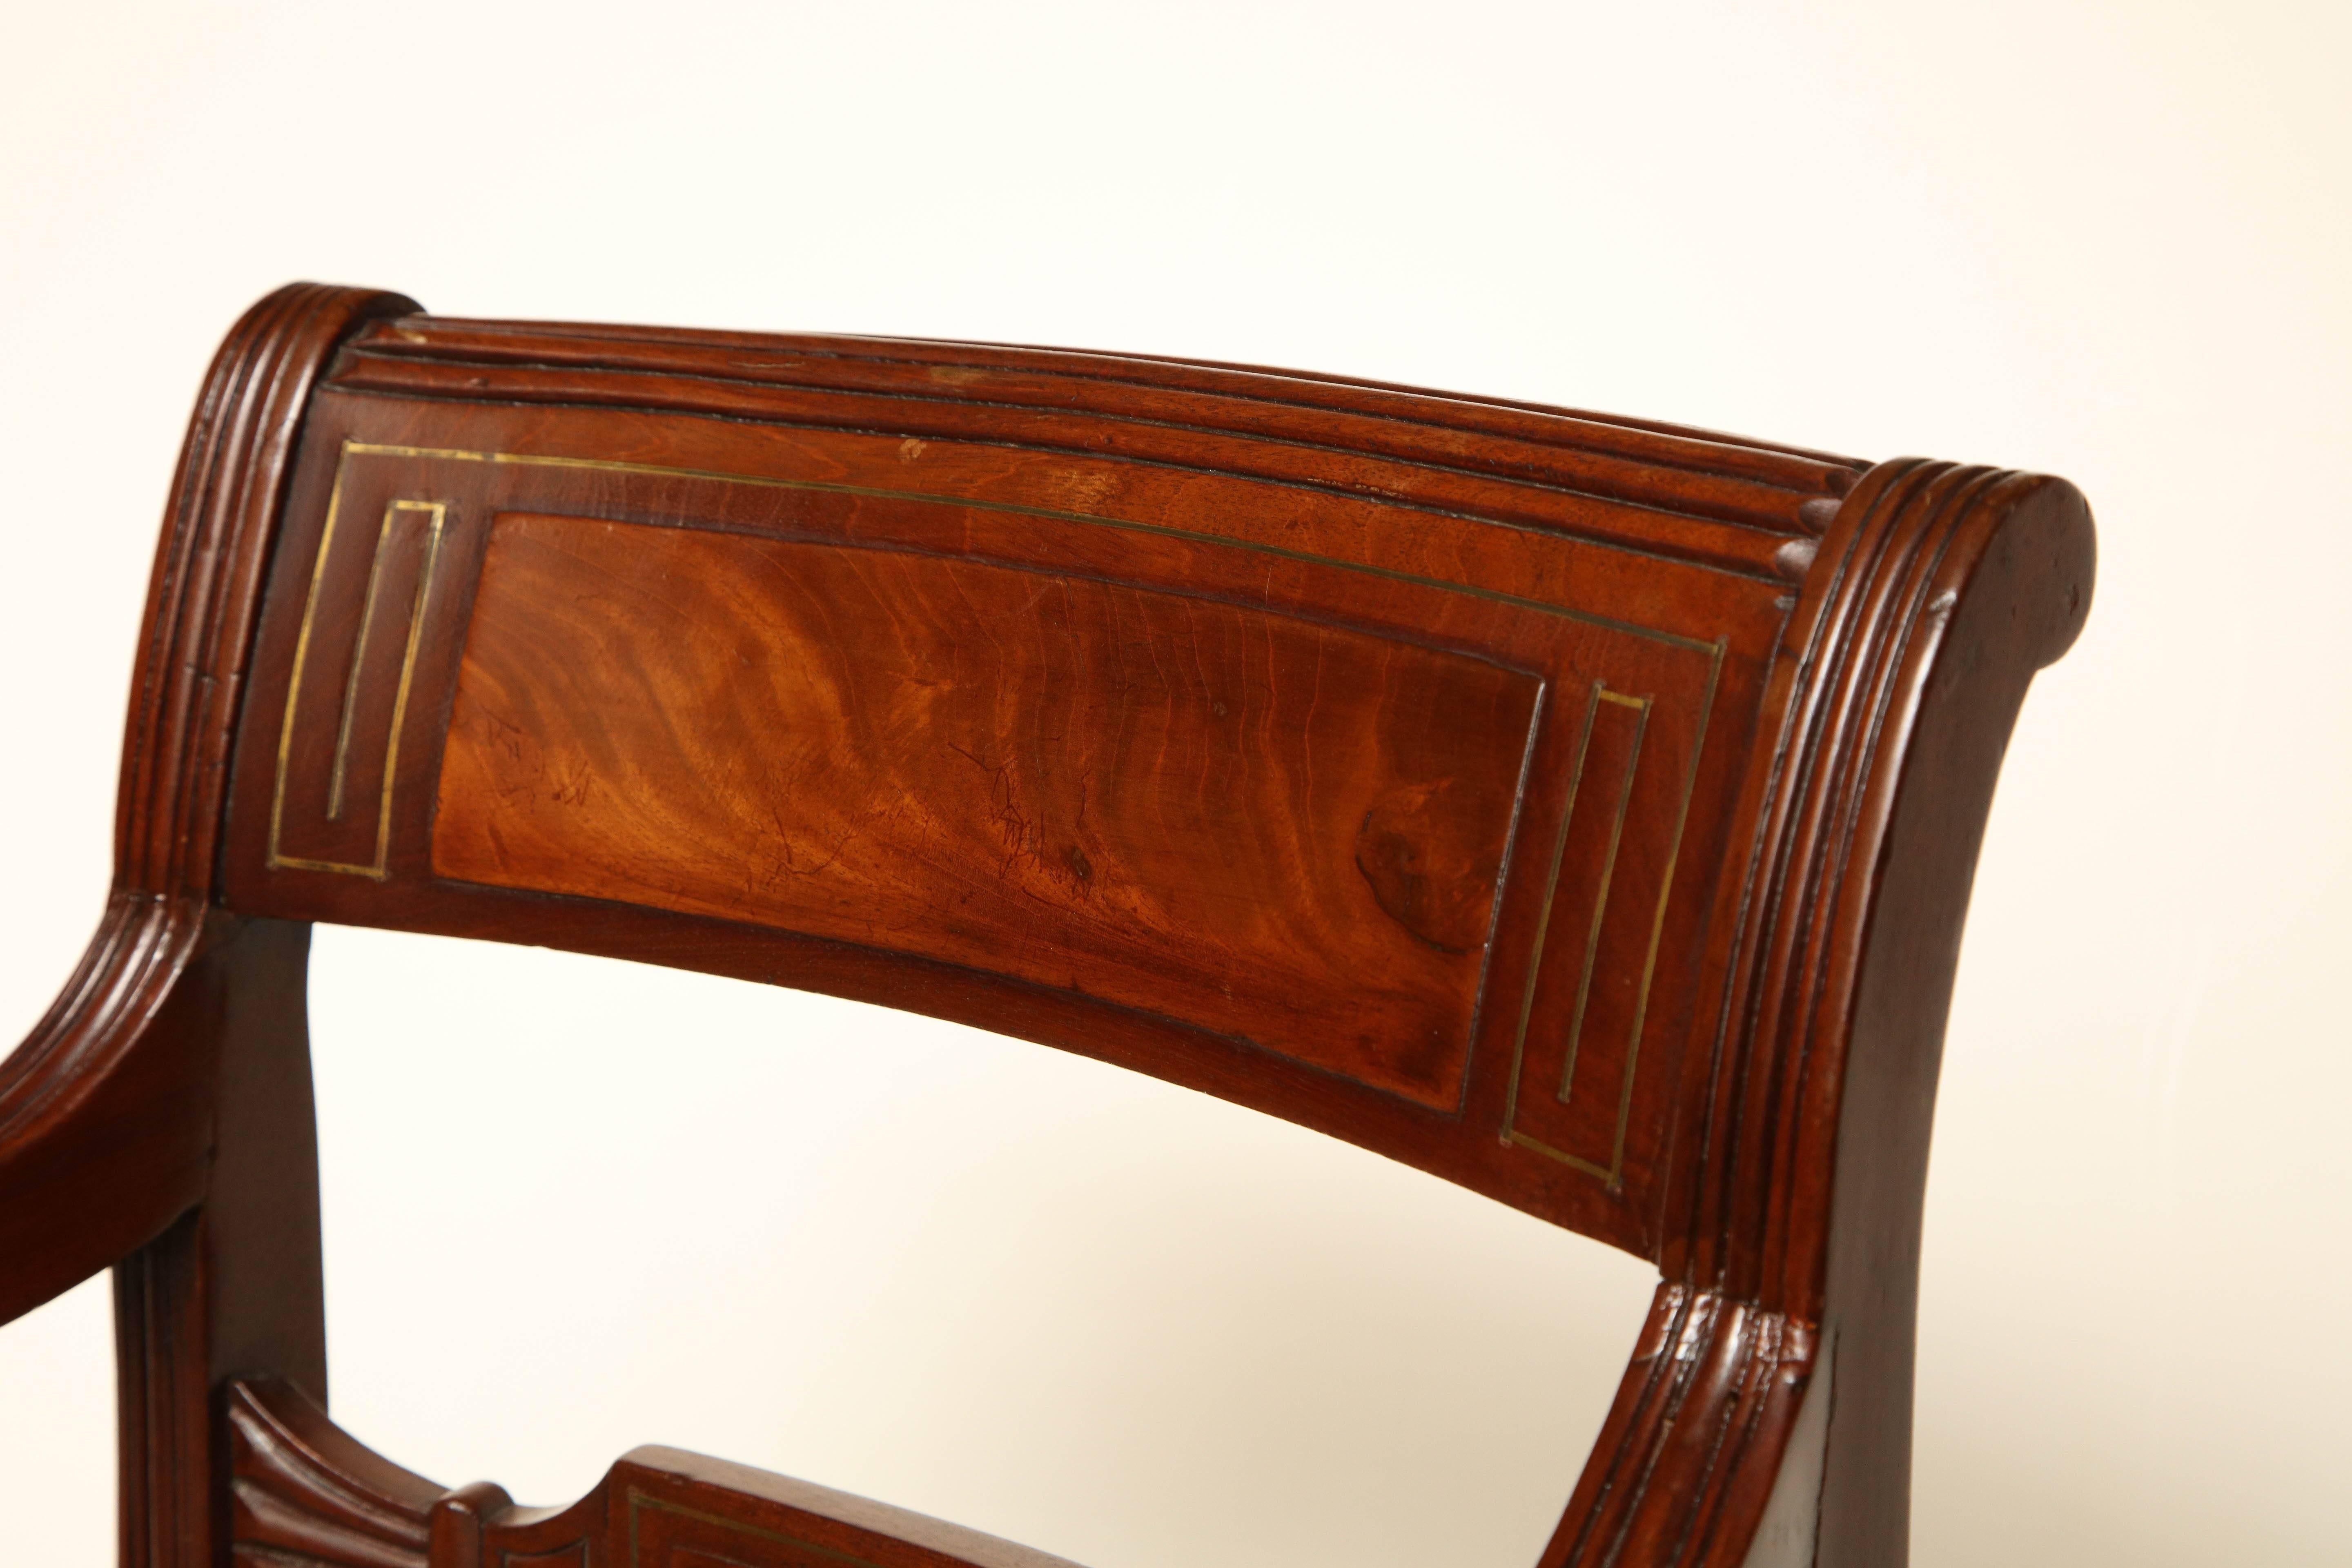 Early 19th Century English Regency, Mahogany and Brass Inlay Desk Chair For Sale 6